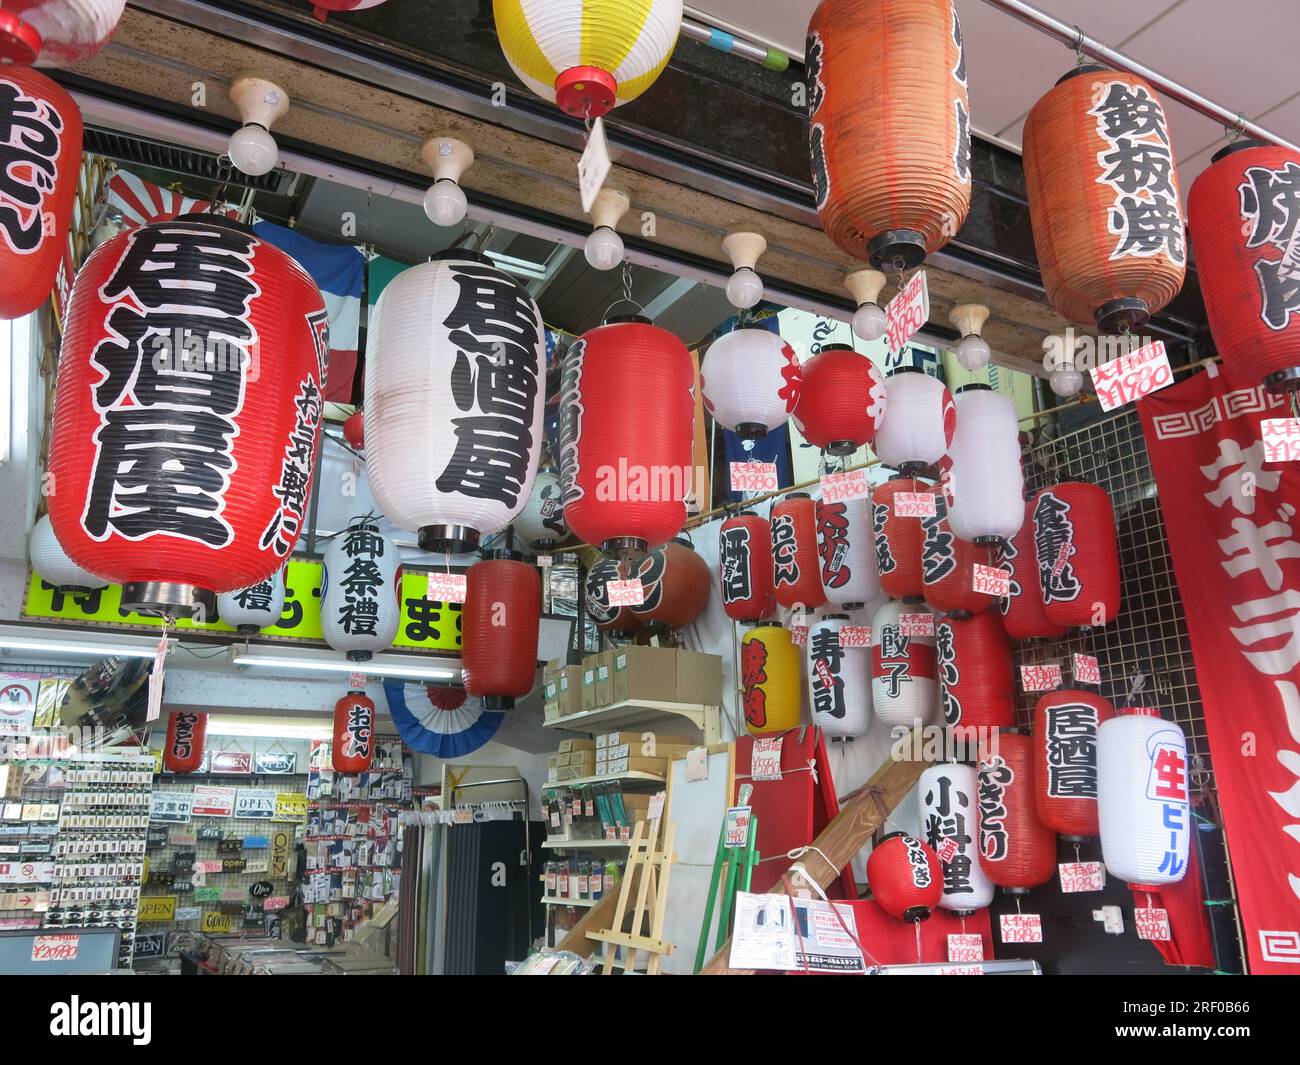 'Kitchen Street', Kappabashi Dori, has specialist cookware stores for all aspects of the restaurant & catering trade, including a lantern shop. Stock Photo